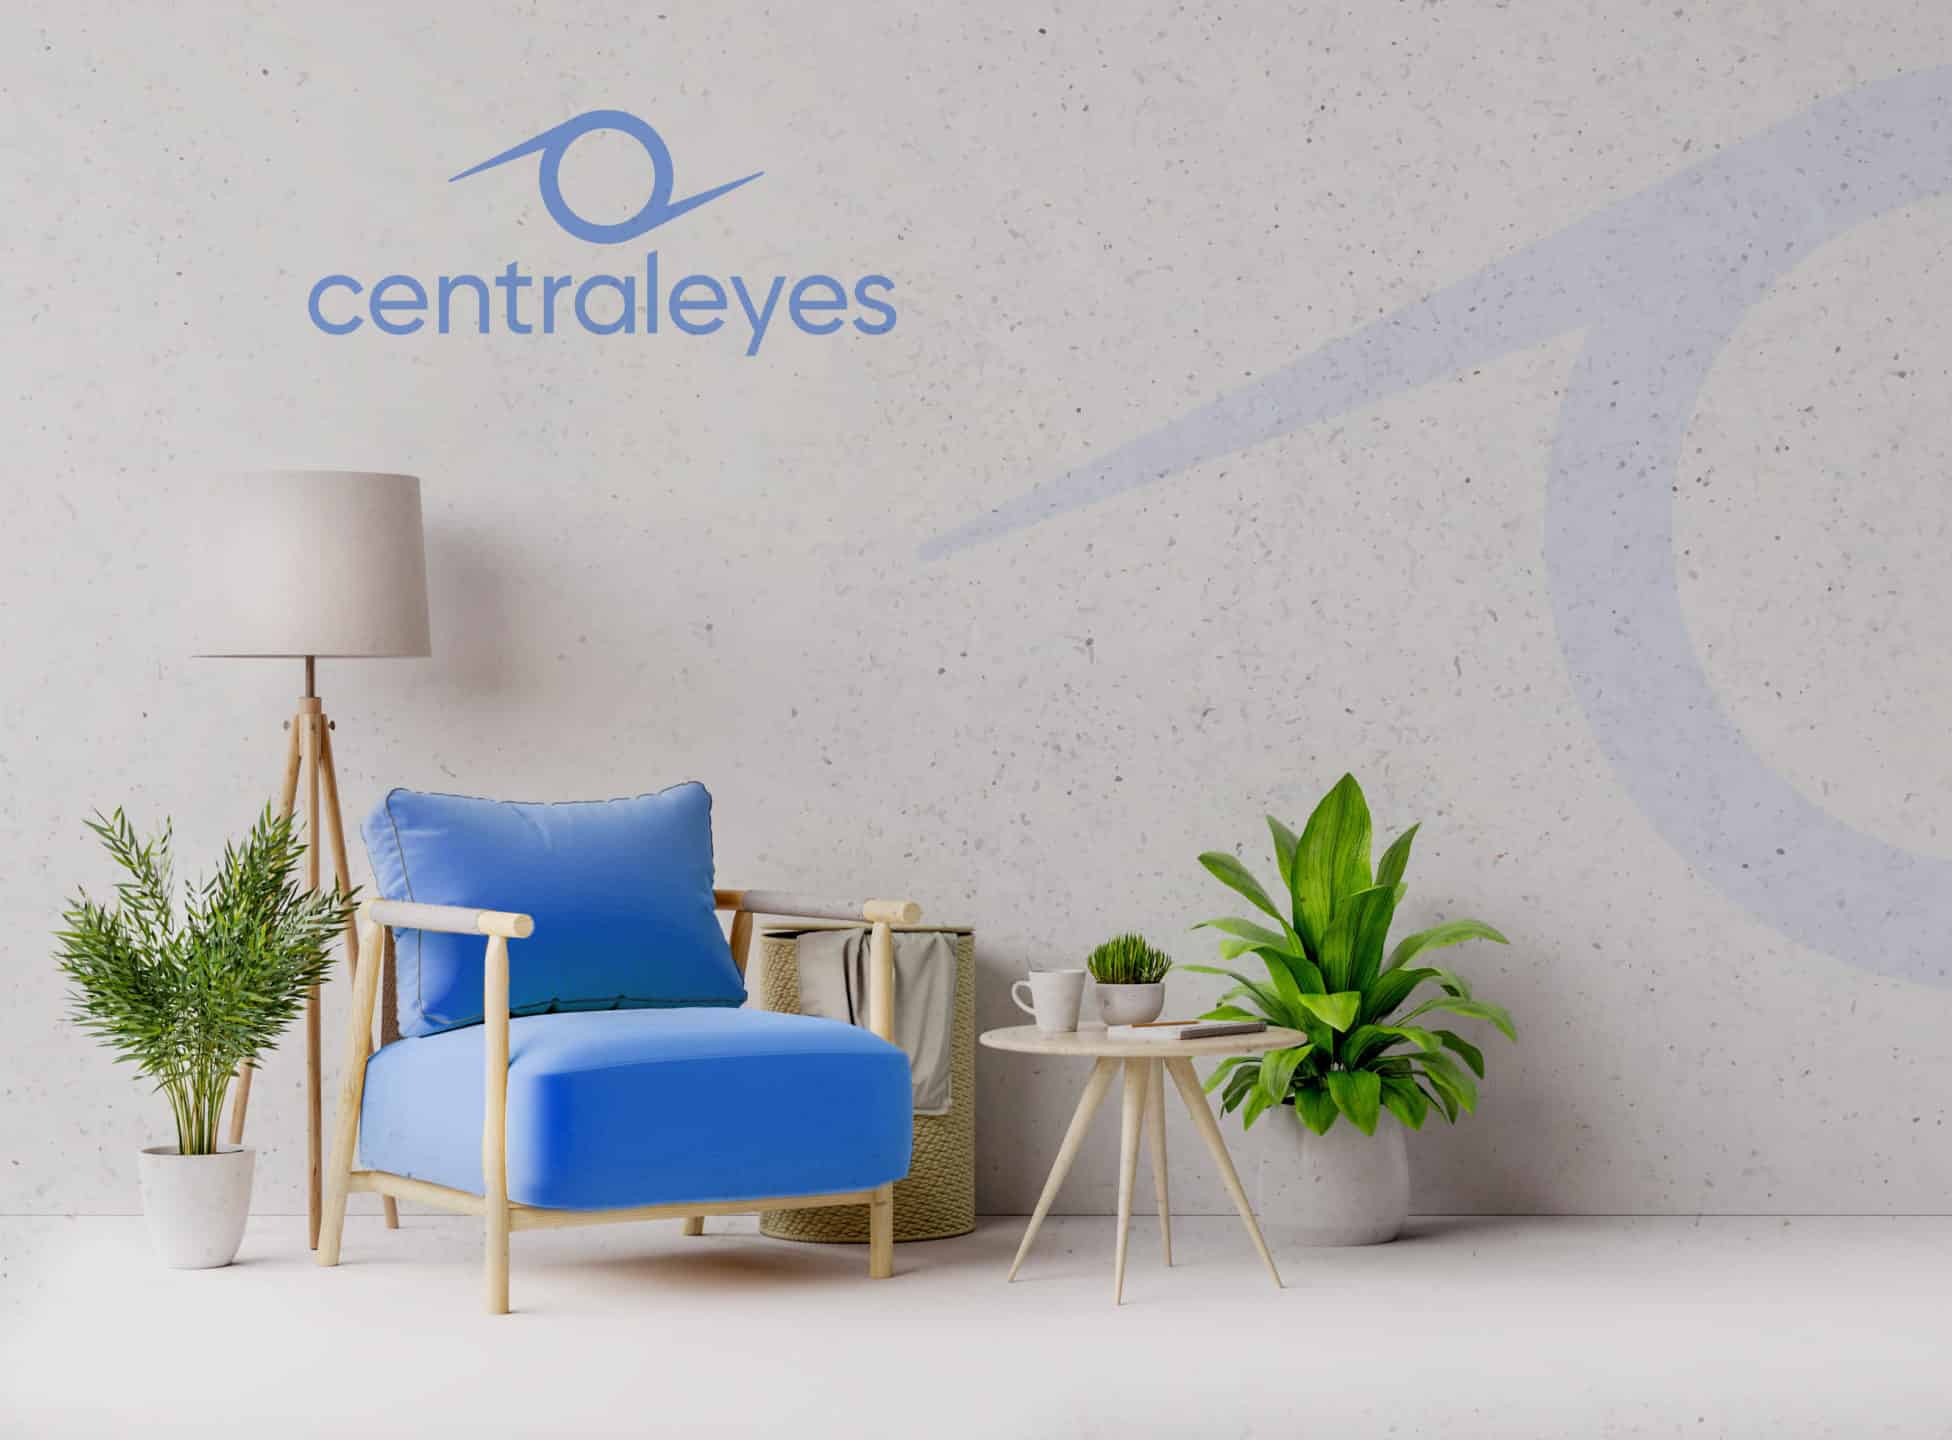 Spotlight Q&A with Centraleyes at Safety Detectives